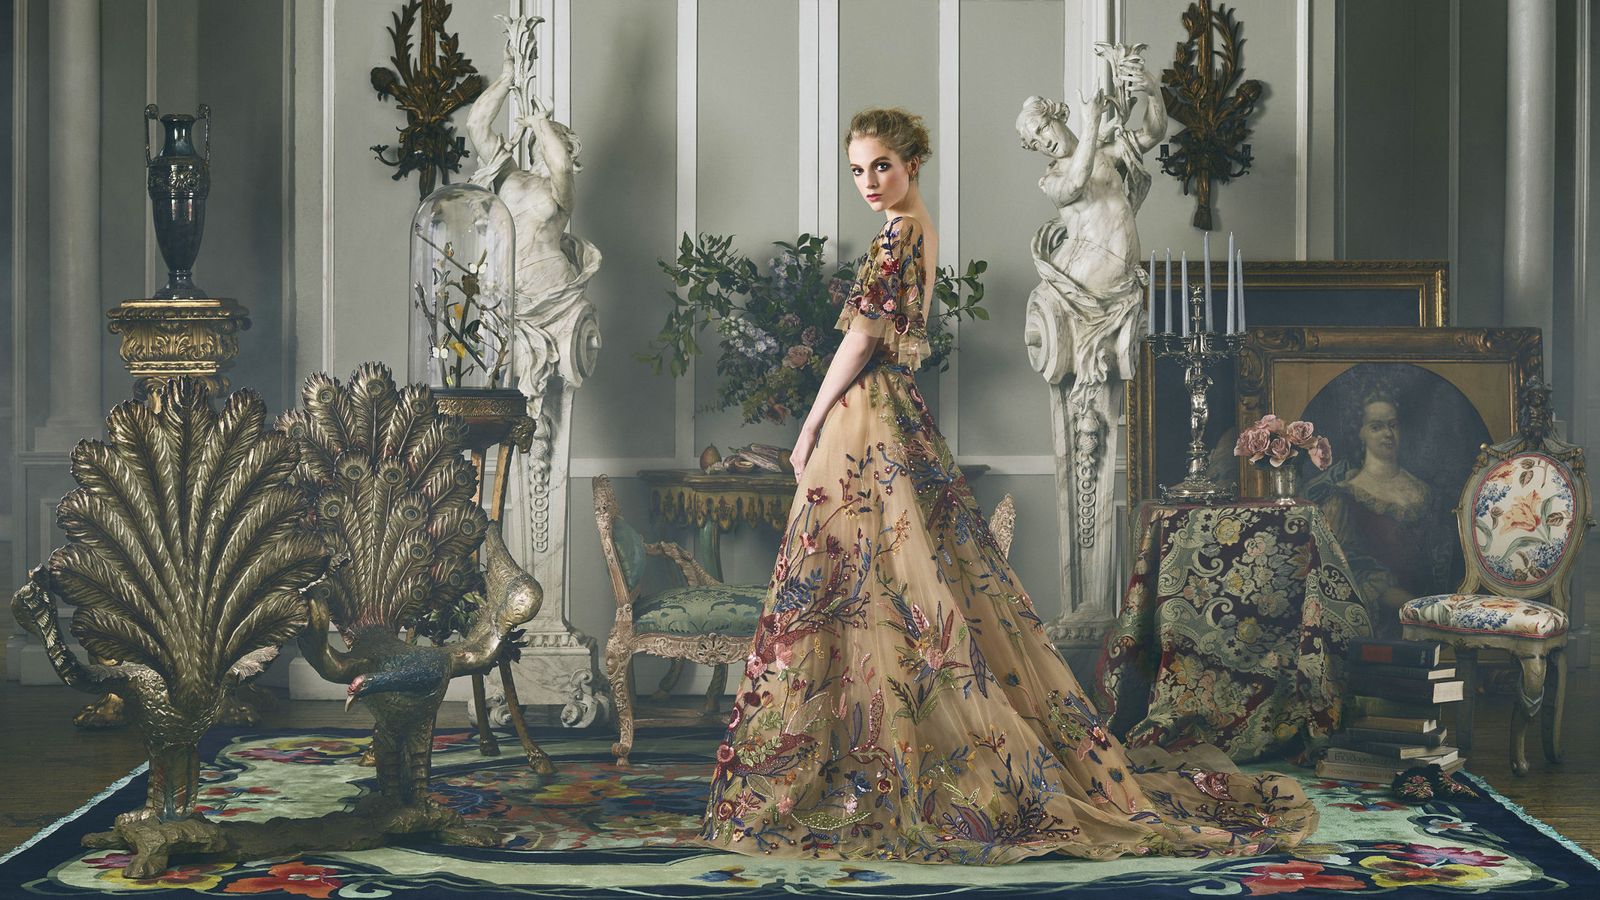 Zuhair Murad Haute Couture embroidered gown in decorative setting